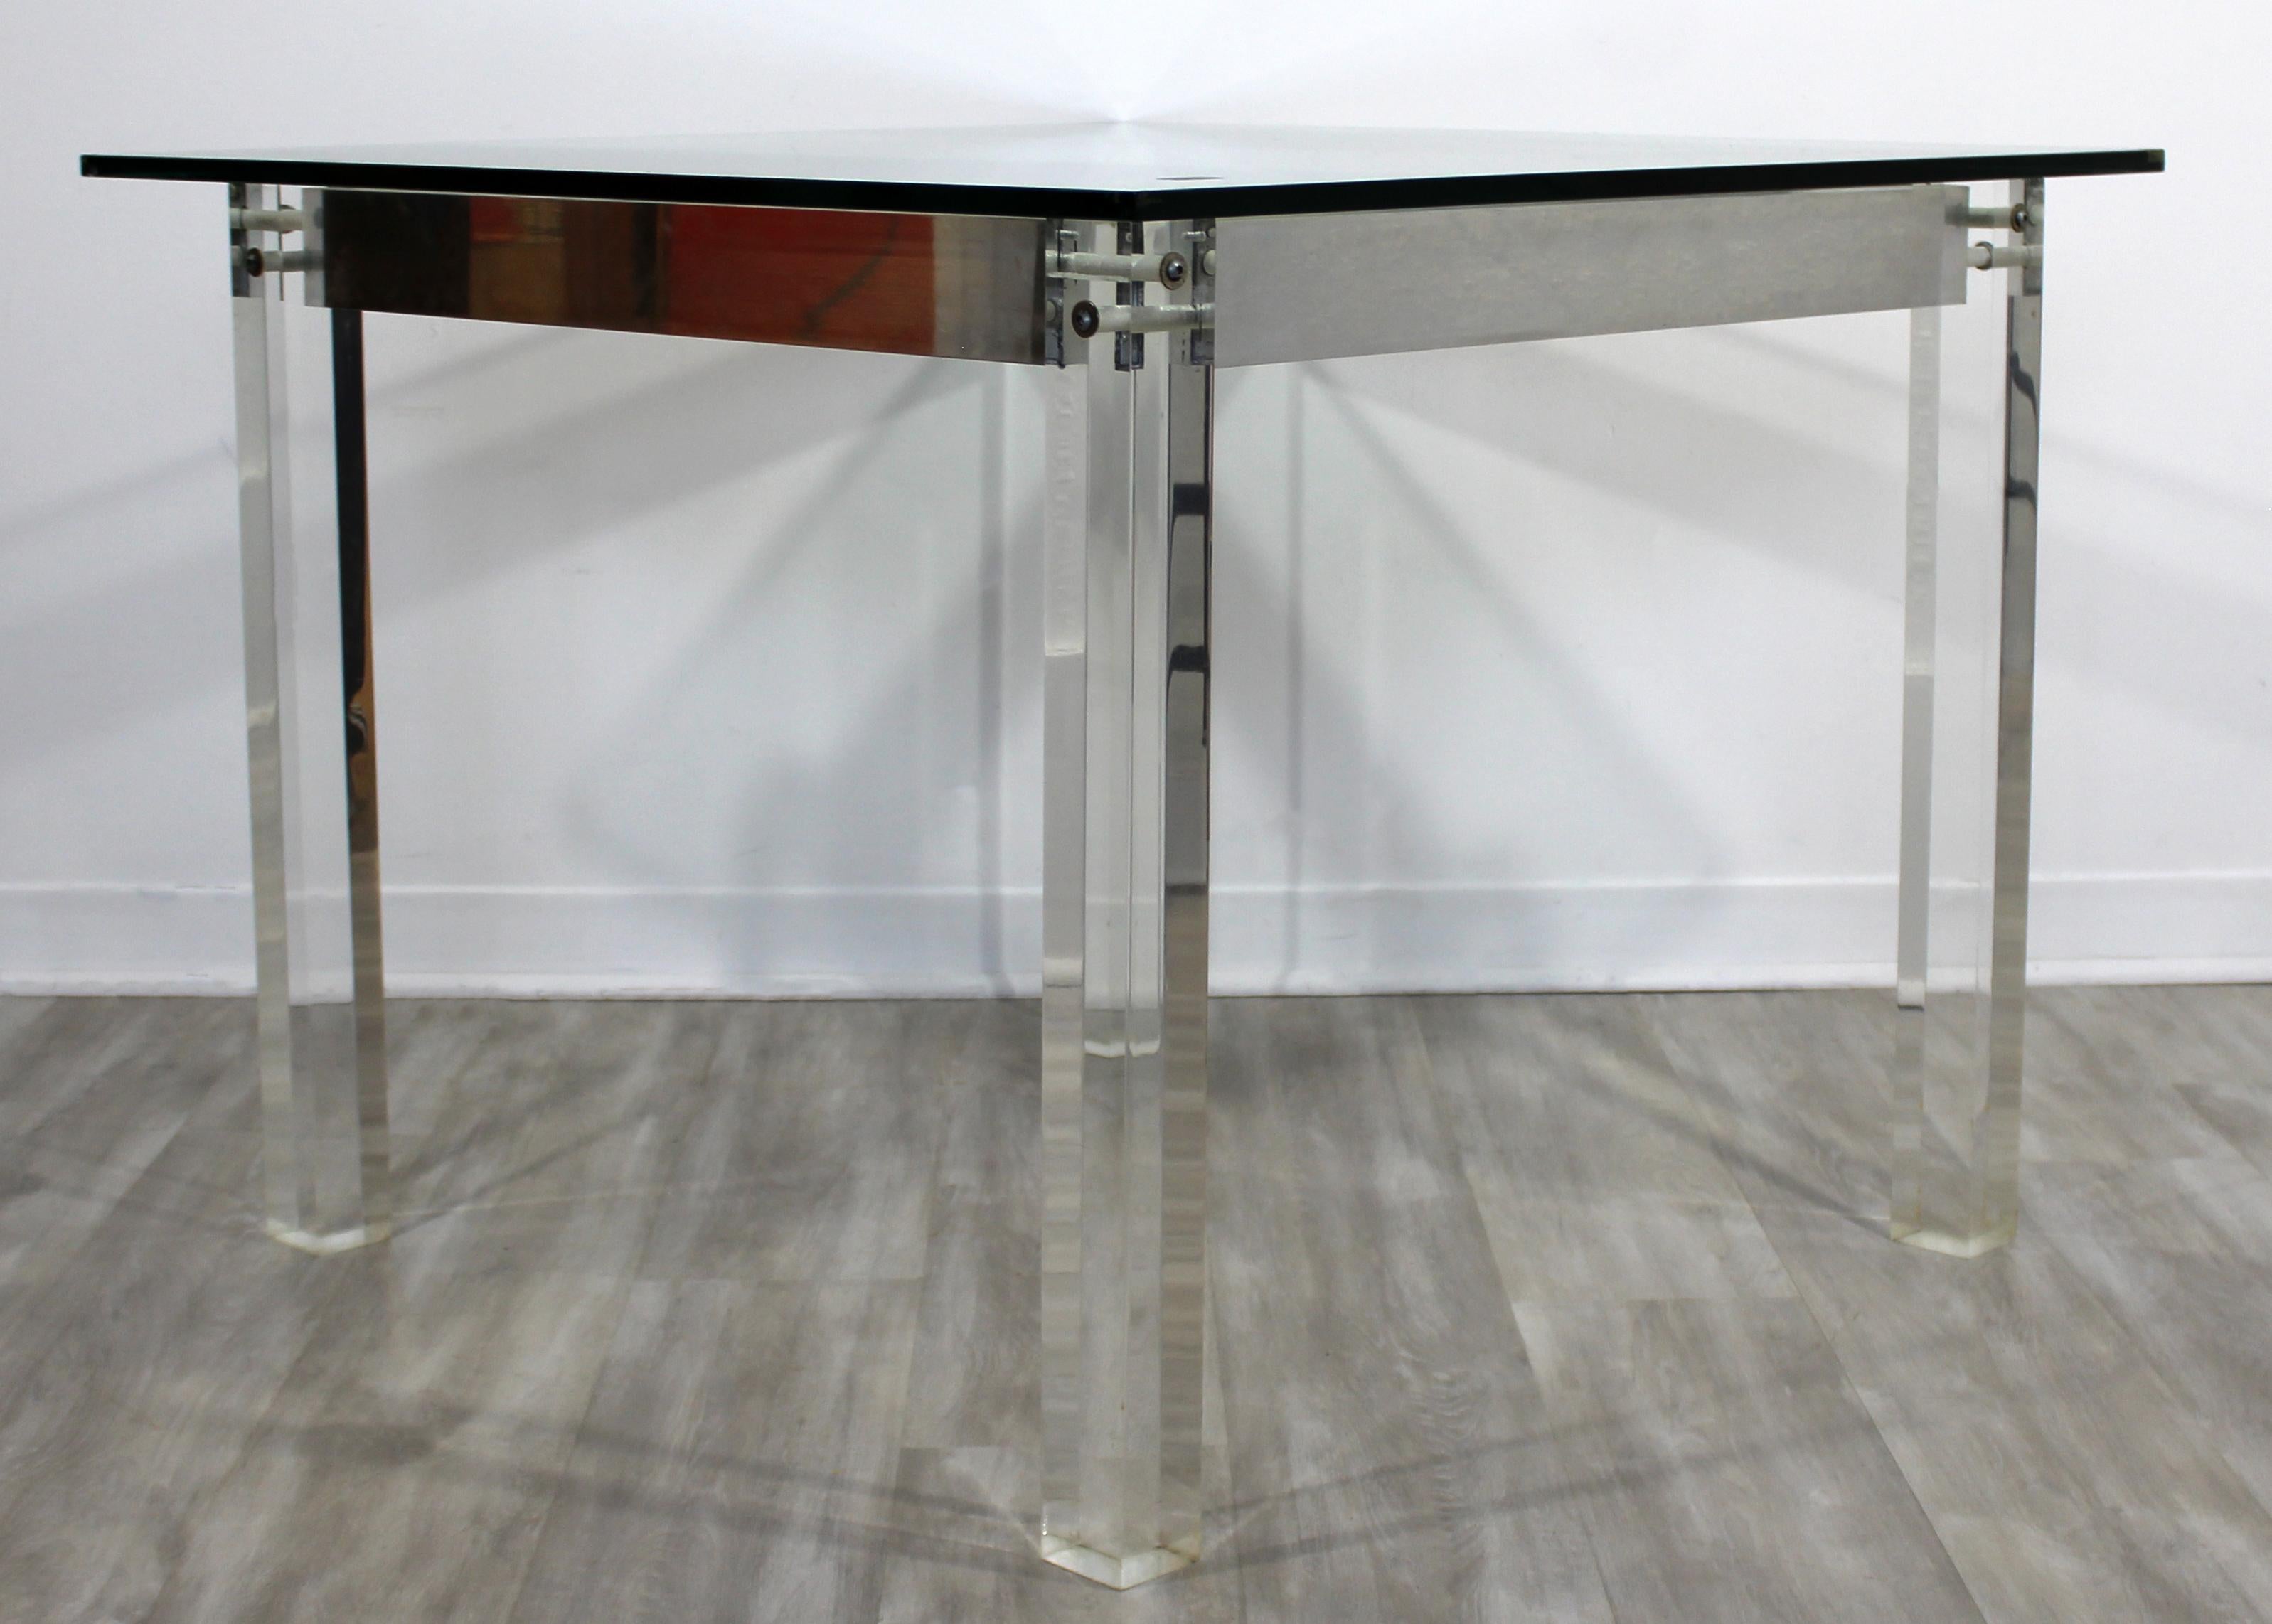 For your consideration is a stunning, square glass topped dinette or game table, on Lucite acrylic legs, circa 1980s. In very good vintage condition. The dimensions are 33